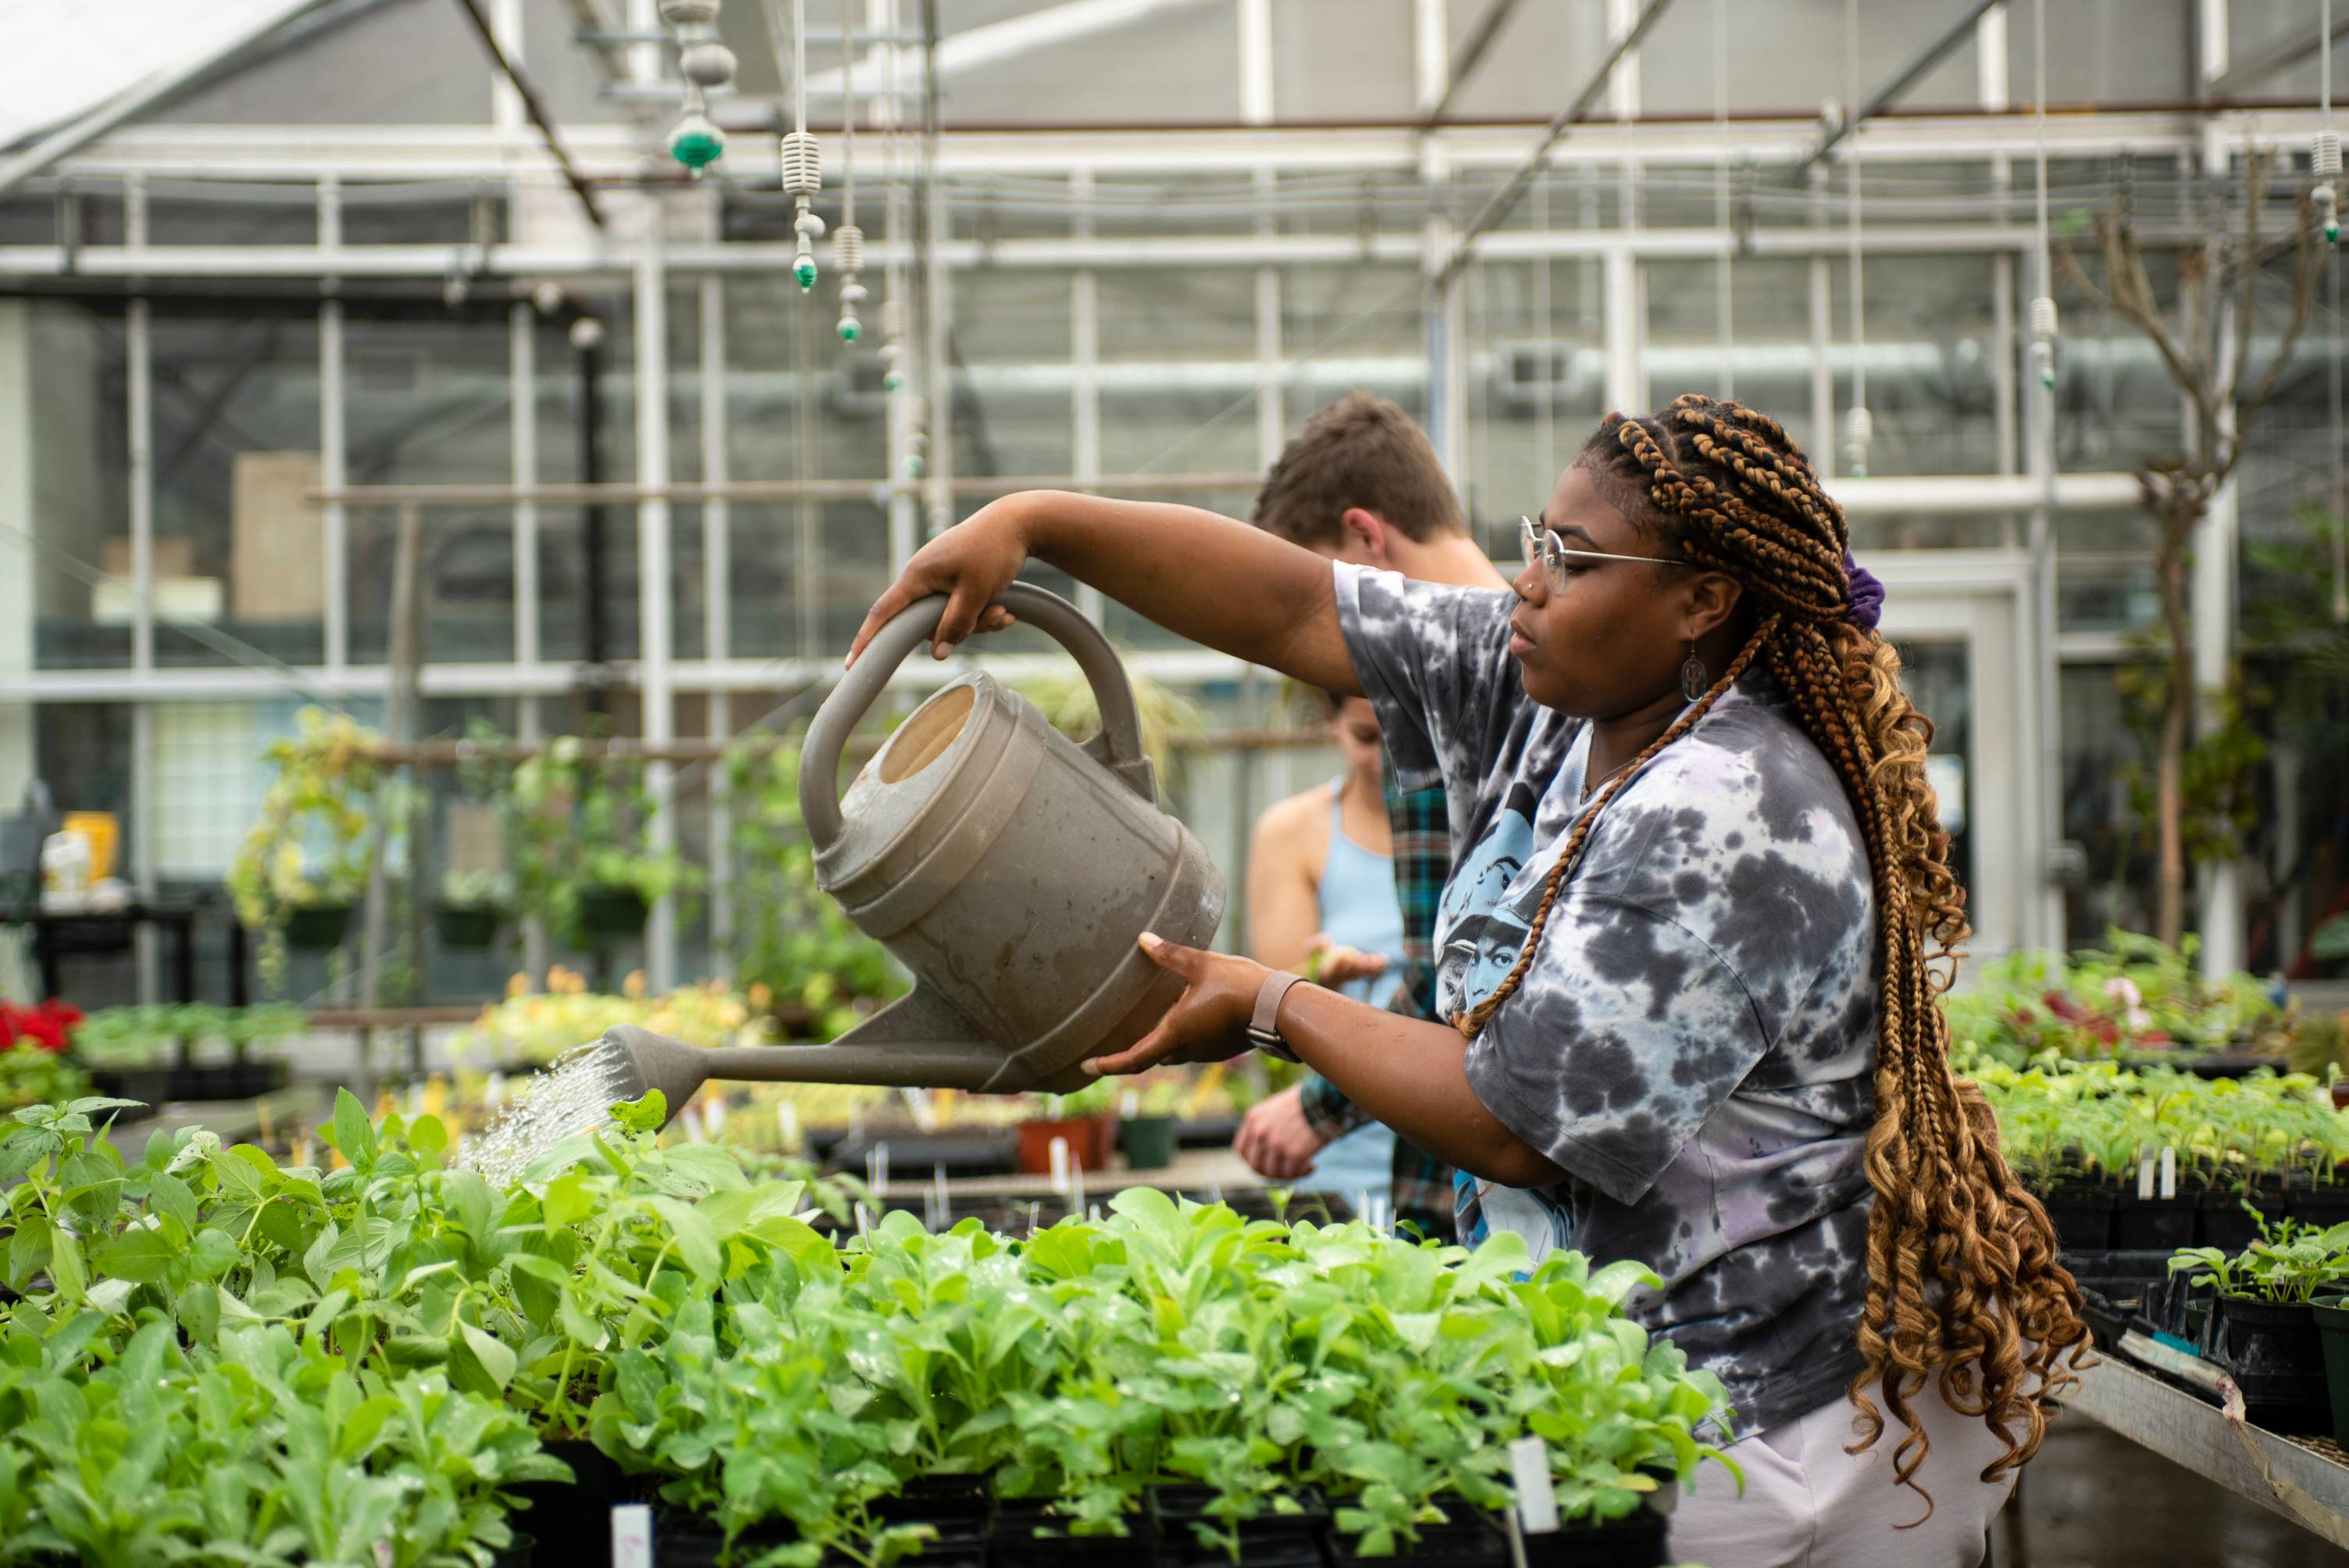 Student watering plants inside the greenhouse